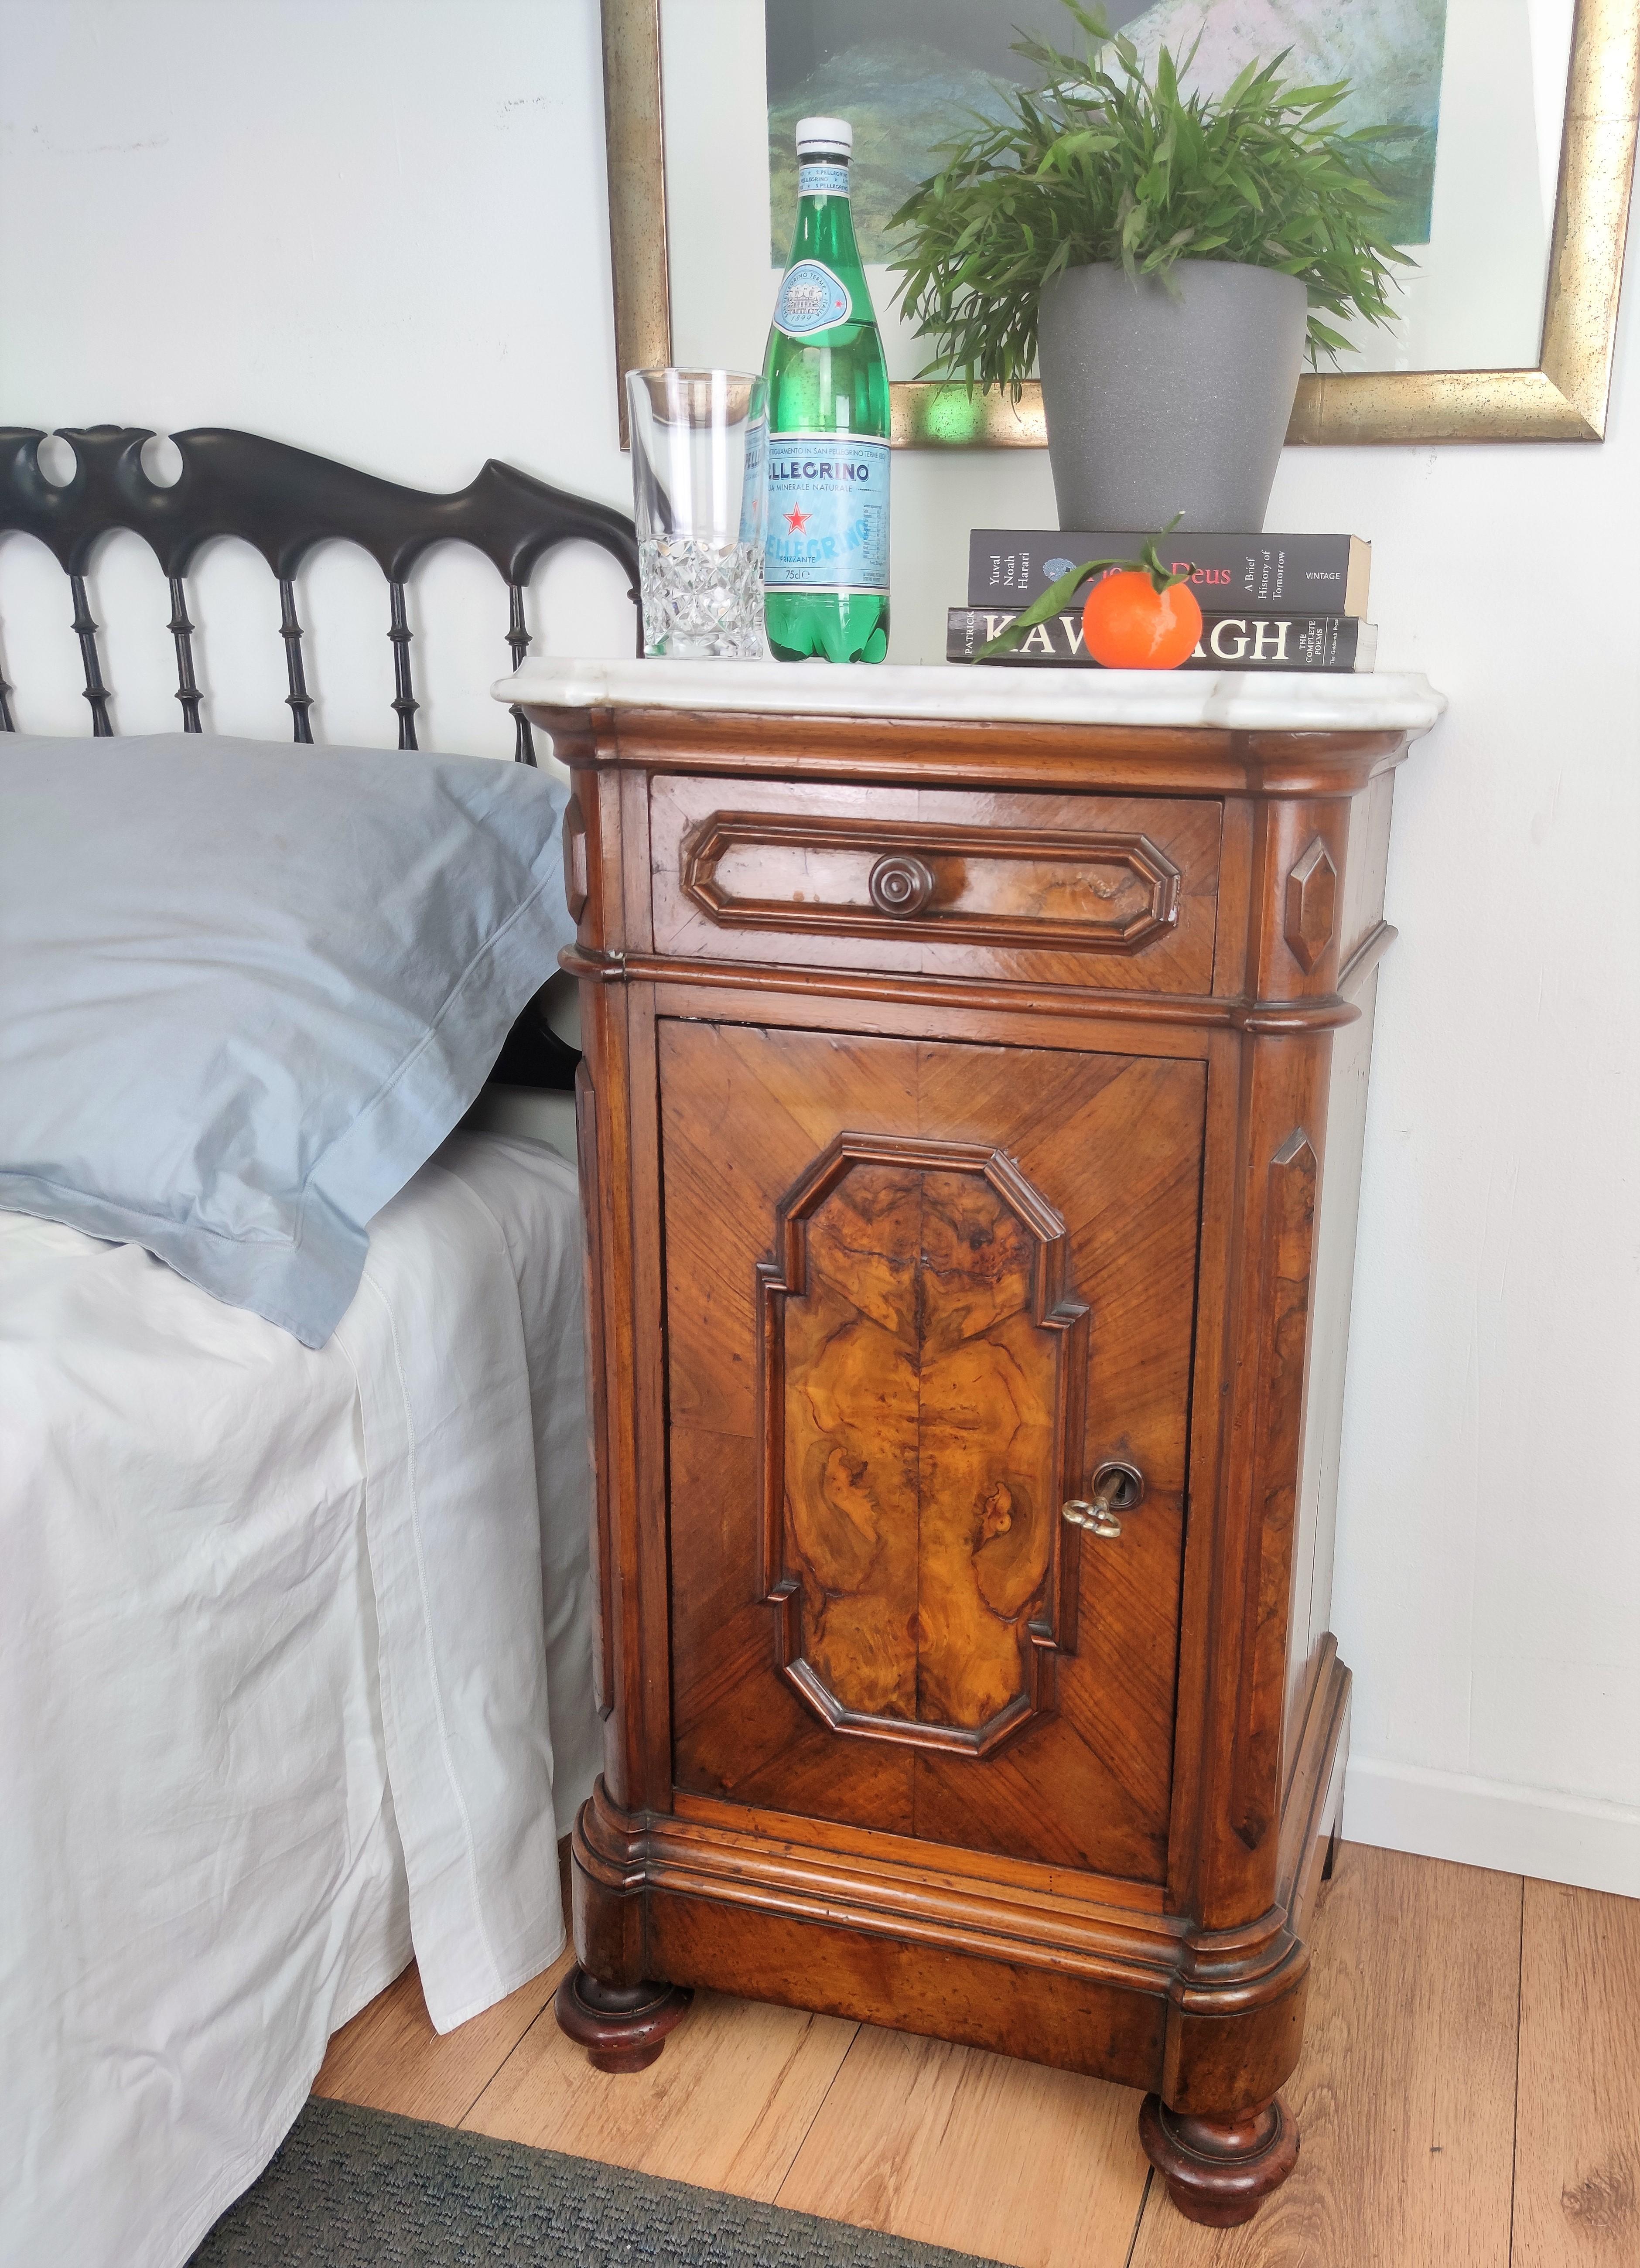 Pair of lovely antique Italian night stands or side tables with greatly carved doors and drawers and white beveled and shaped marble top. The nightstands have a door and drawer that are beautifully crafted and framed in the front with the typical